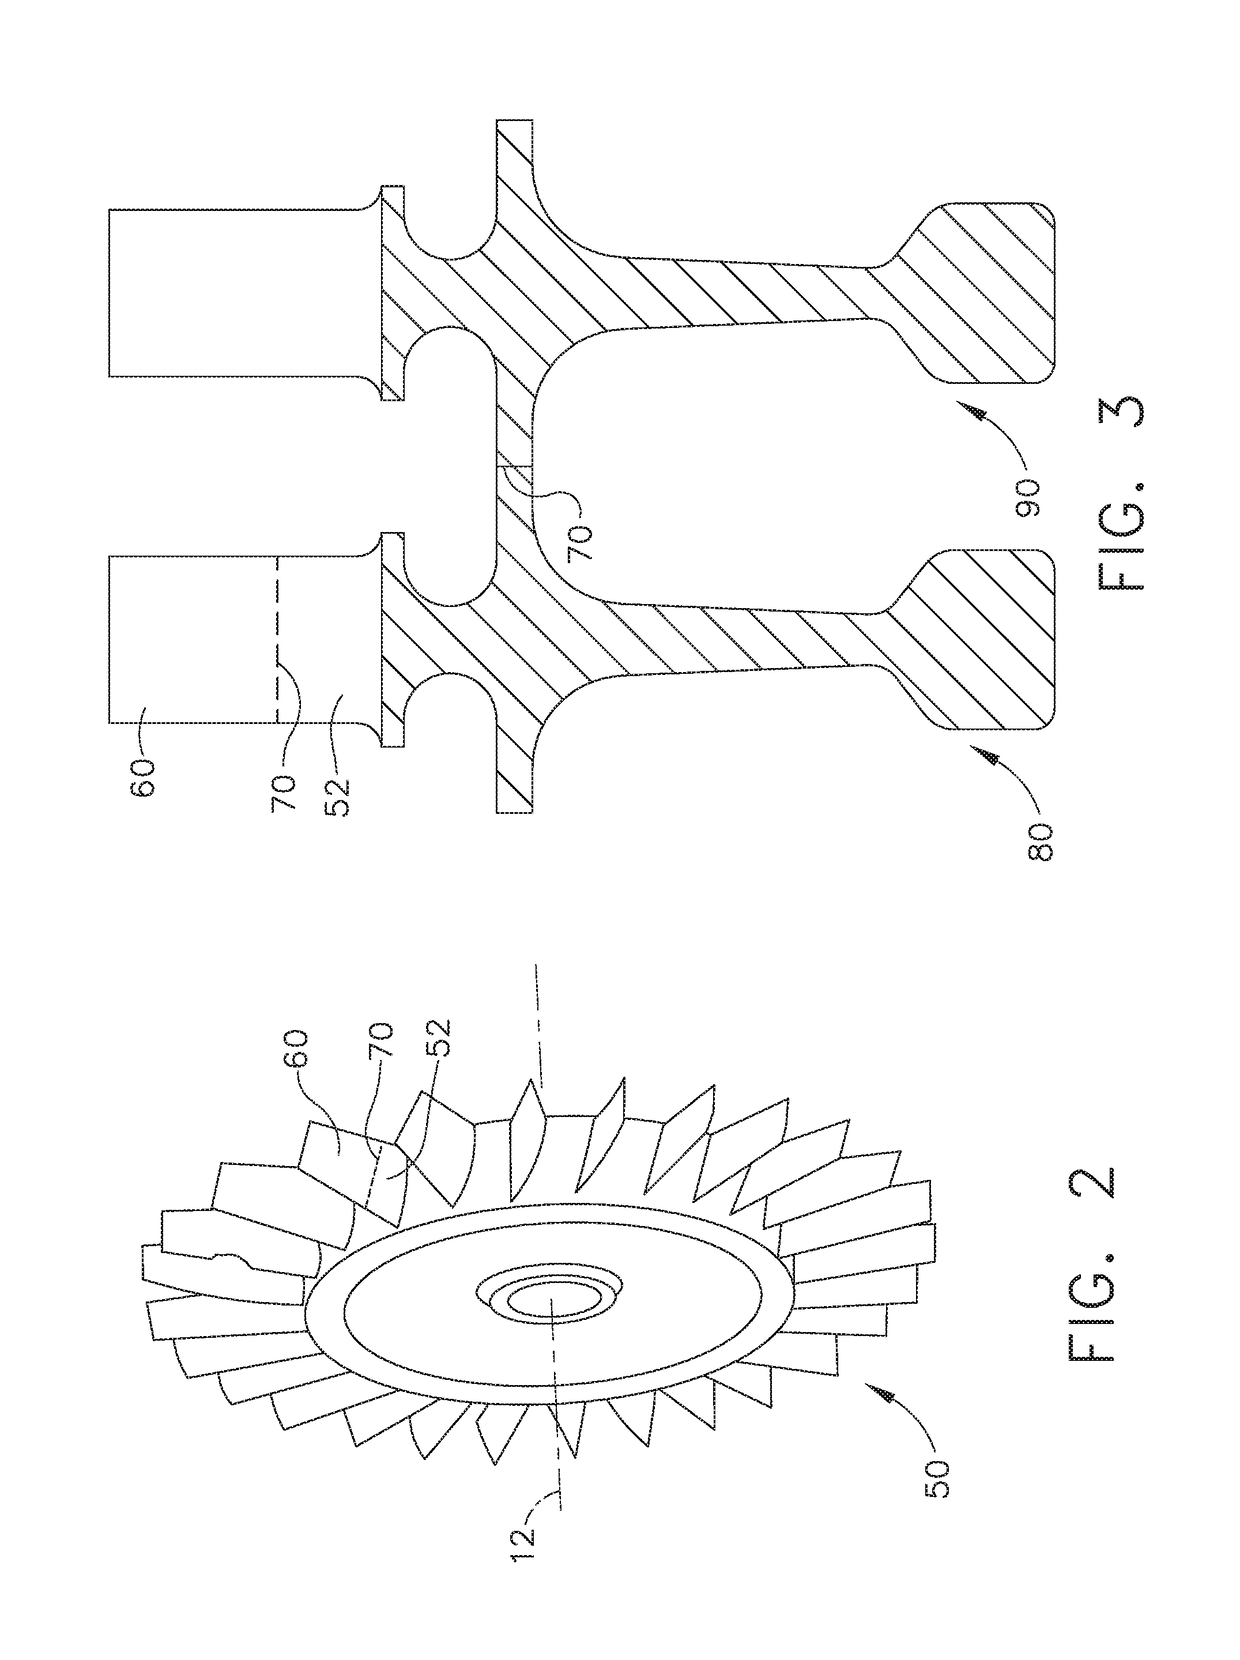 Titanium alloys and their methods of production